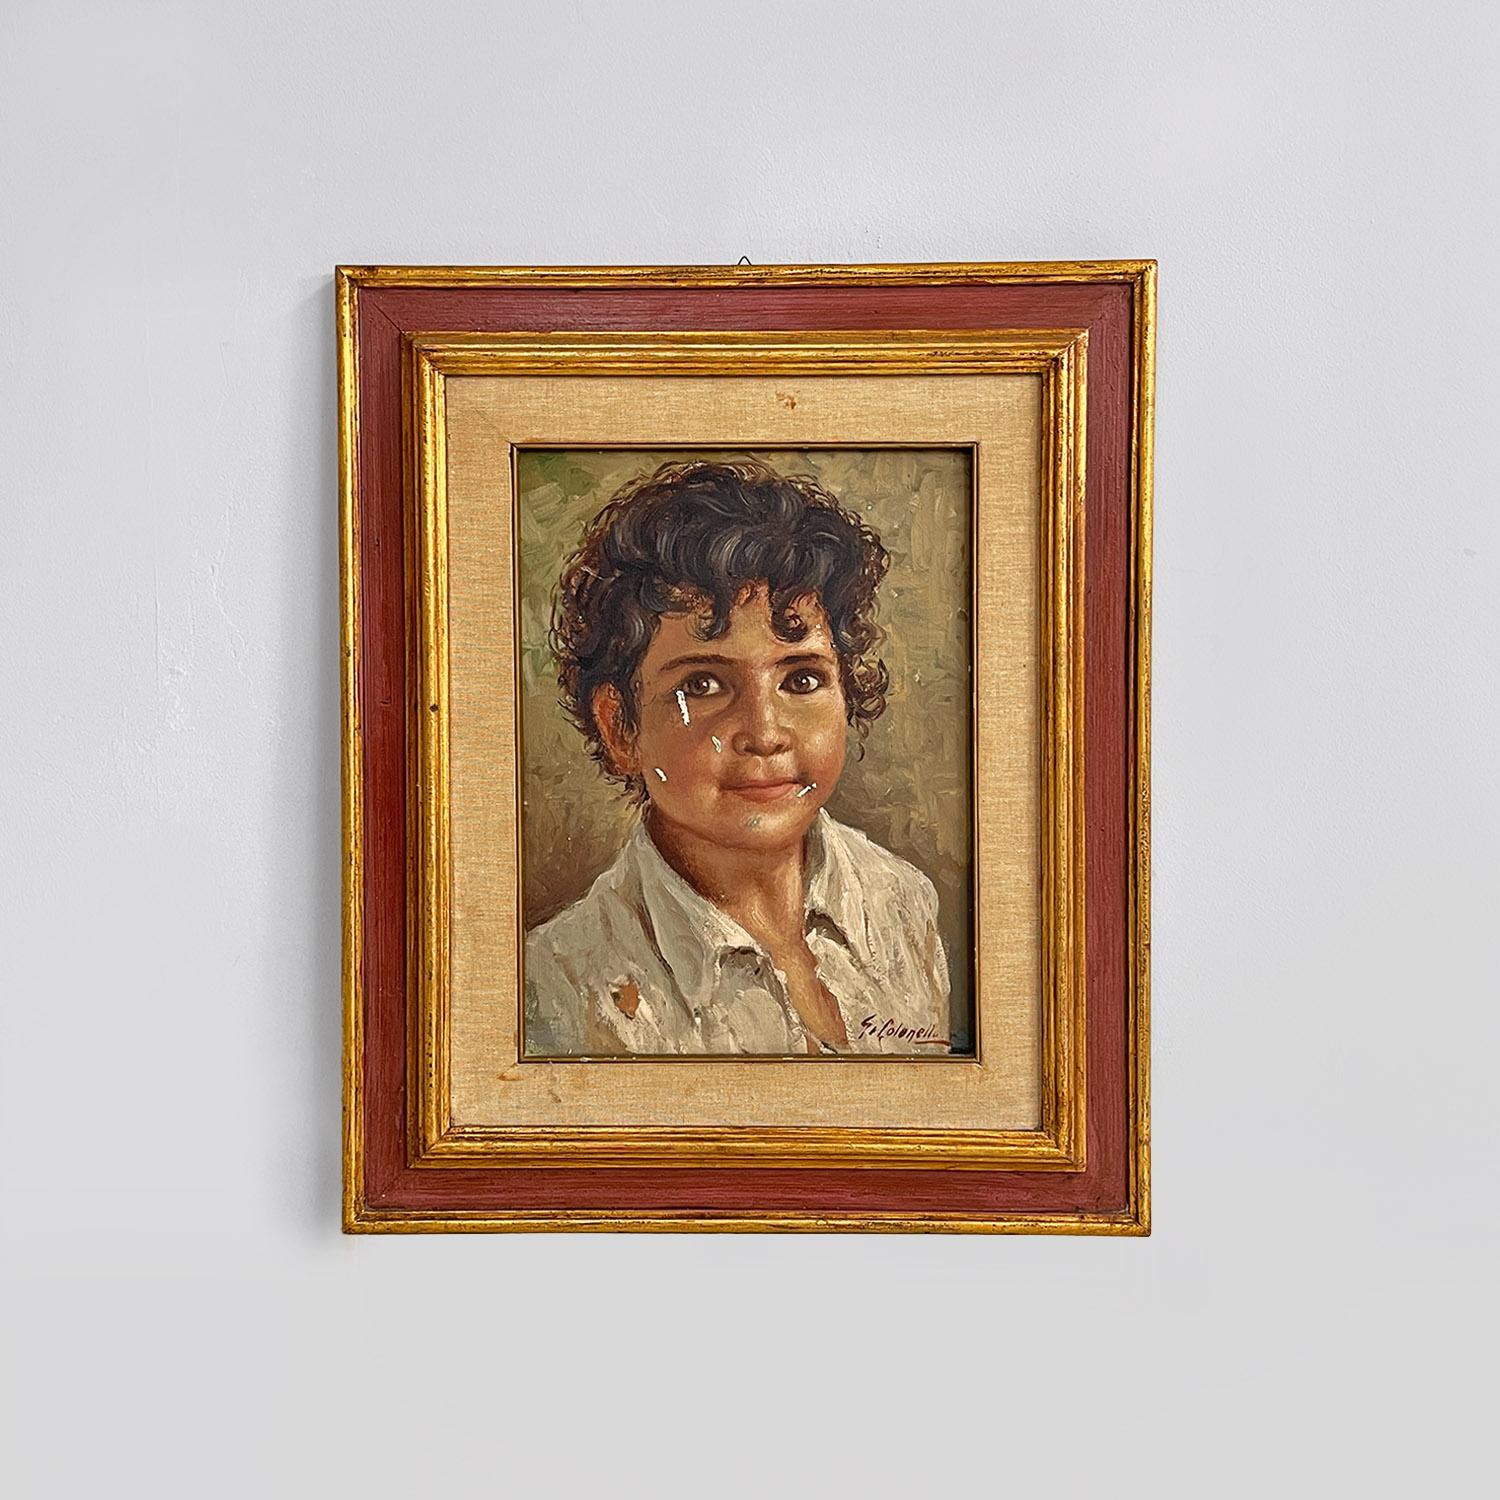 Painting made with tempera colours, representing a child with dark, wavy hair and a rounded face. The colors are warm and the frame is made of wood, painted gold or brown and beige fabric.
Signed G. Colonello and dating back to around 1900.
Good